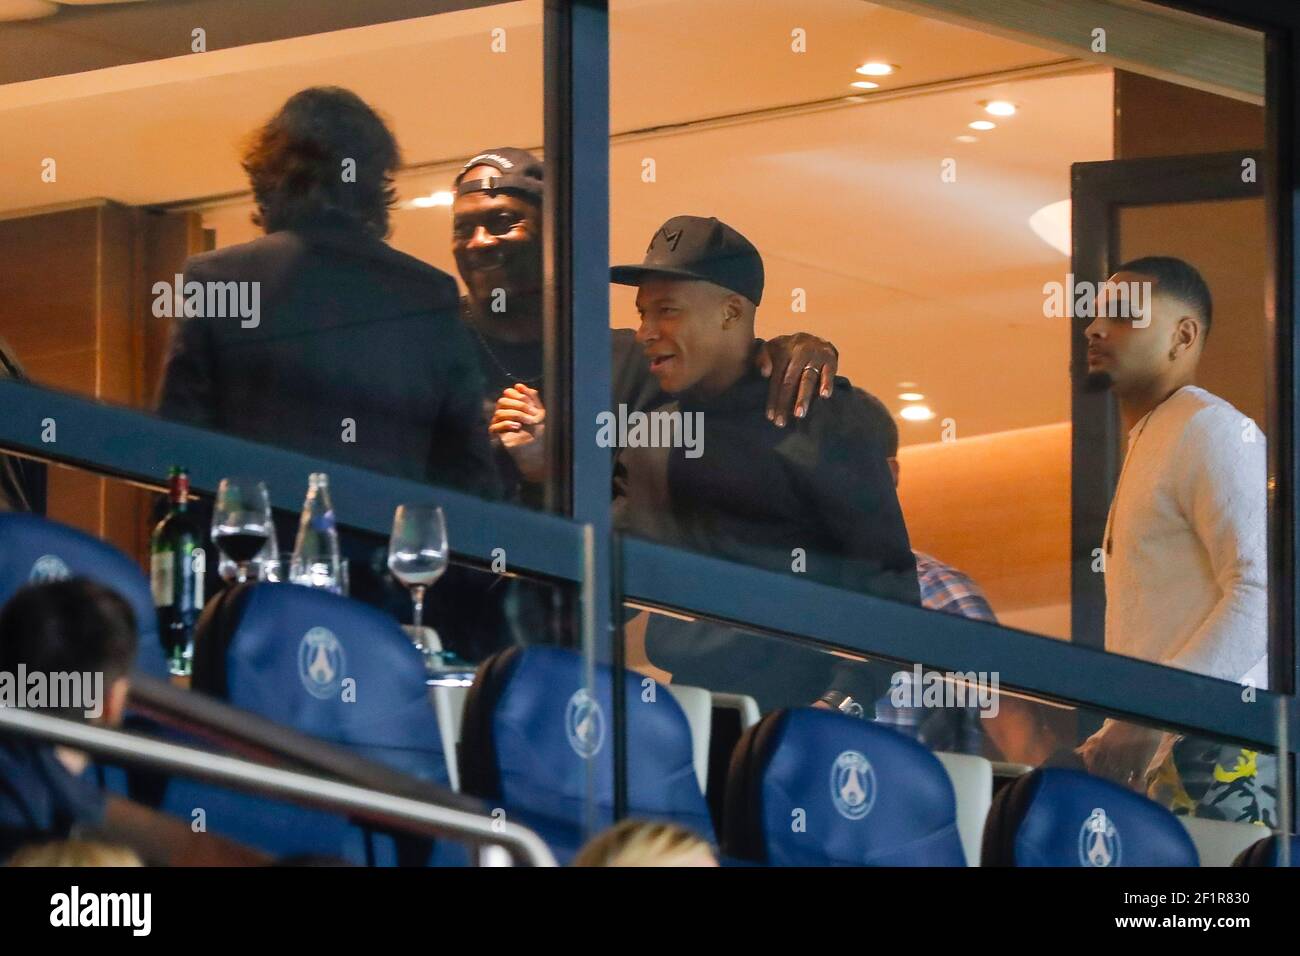 Basket ball player Michael Jeffrey Jordan hand in hand with Kylian Mbappe ( PSG) during the French championship L1 football match between Paris Saint- Germain and Stade de Reims on September 26, 2018 at